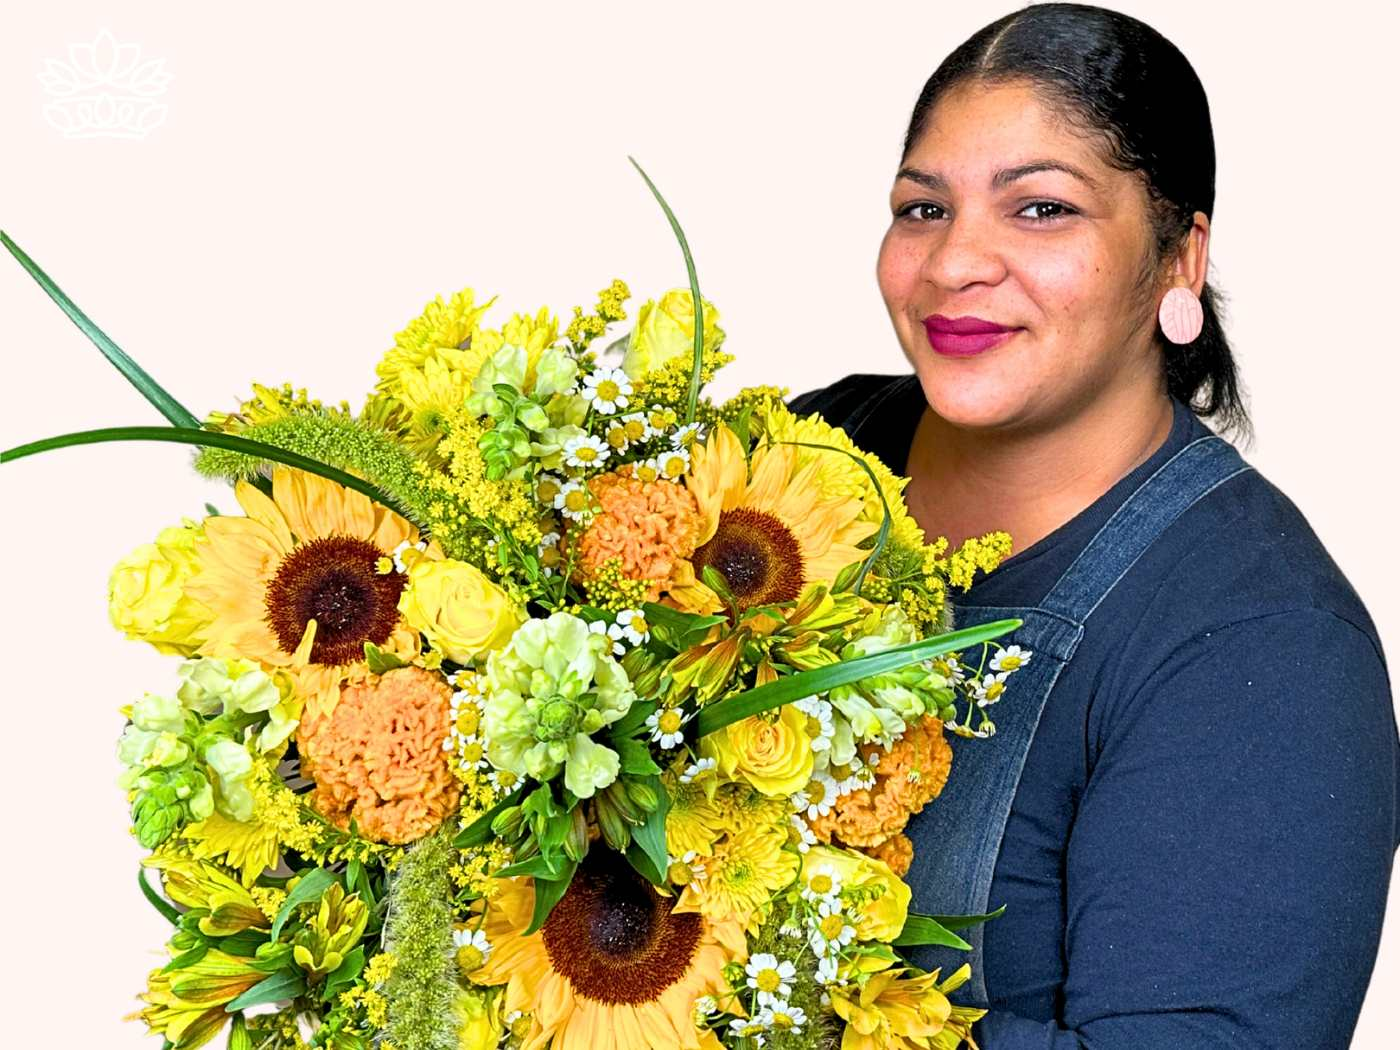 Professional florist presenting a sunlit bouquet from the Florist Choice Bouquets Collection, brimming with sunflowers, yellow roses, and verdant accents. Ideal for corporate gifts, occasions, or as part of gift hampers. Delivers an impeccable example of expert flower arrangements. Fabulous Flowers and Gifts.